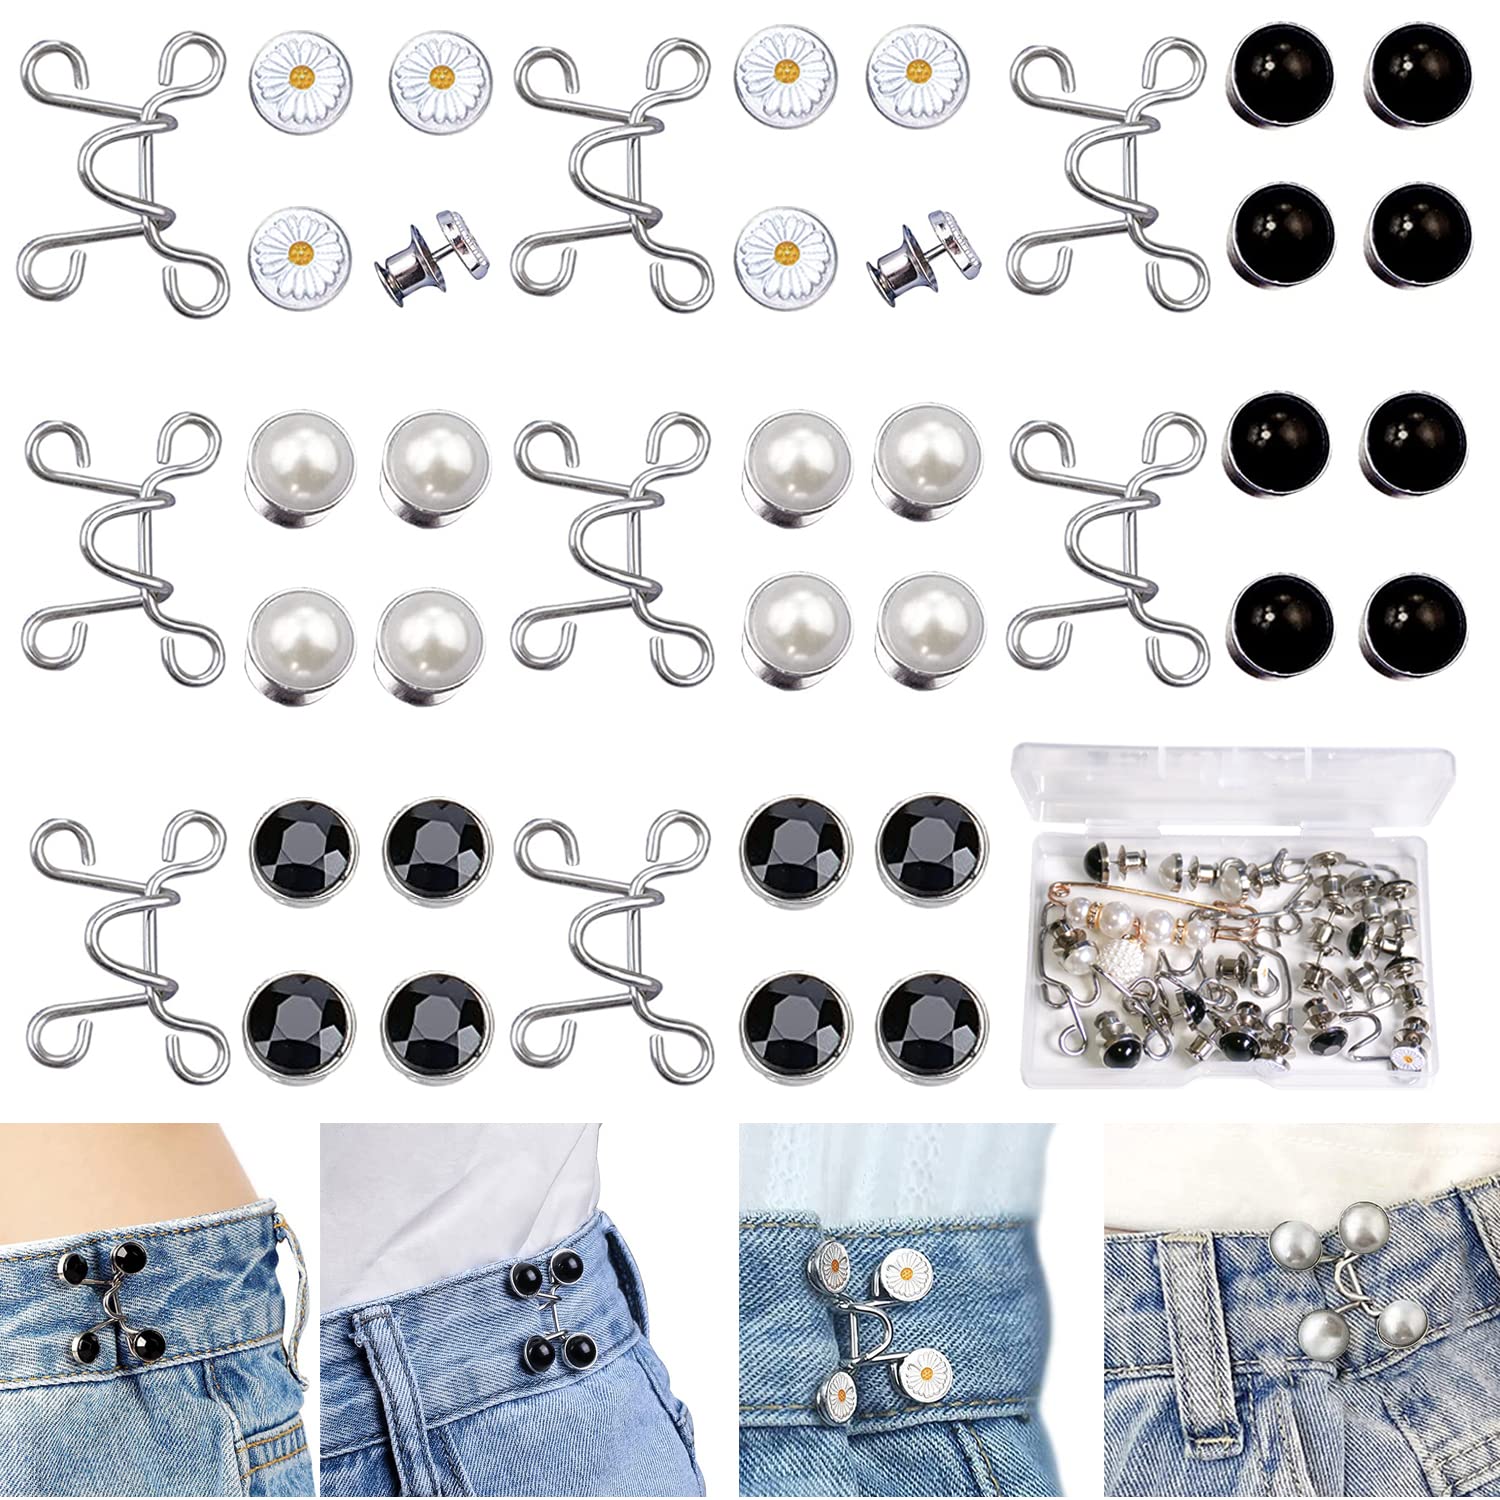 8 Sets Button Pins For Jeans, 4 Styles Instant Jean Button Pins